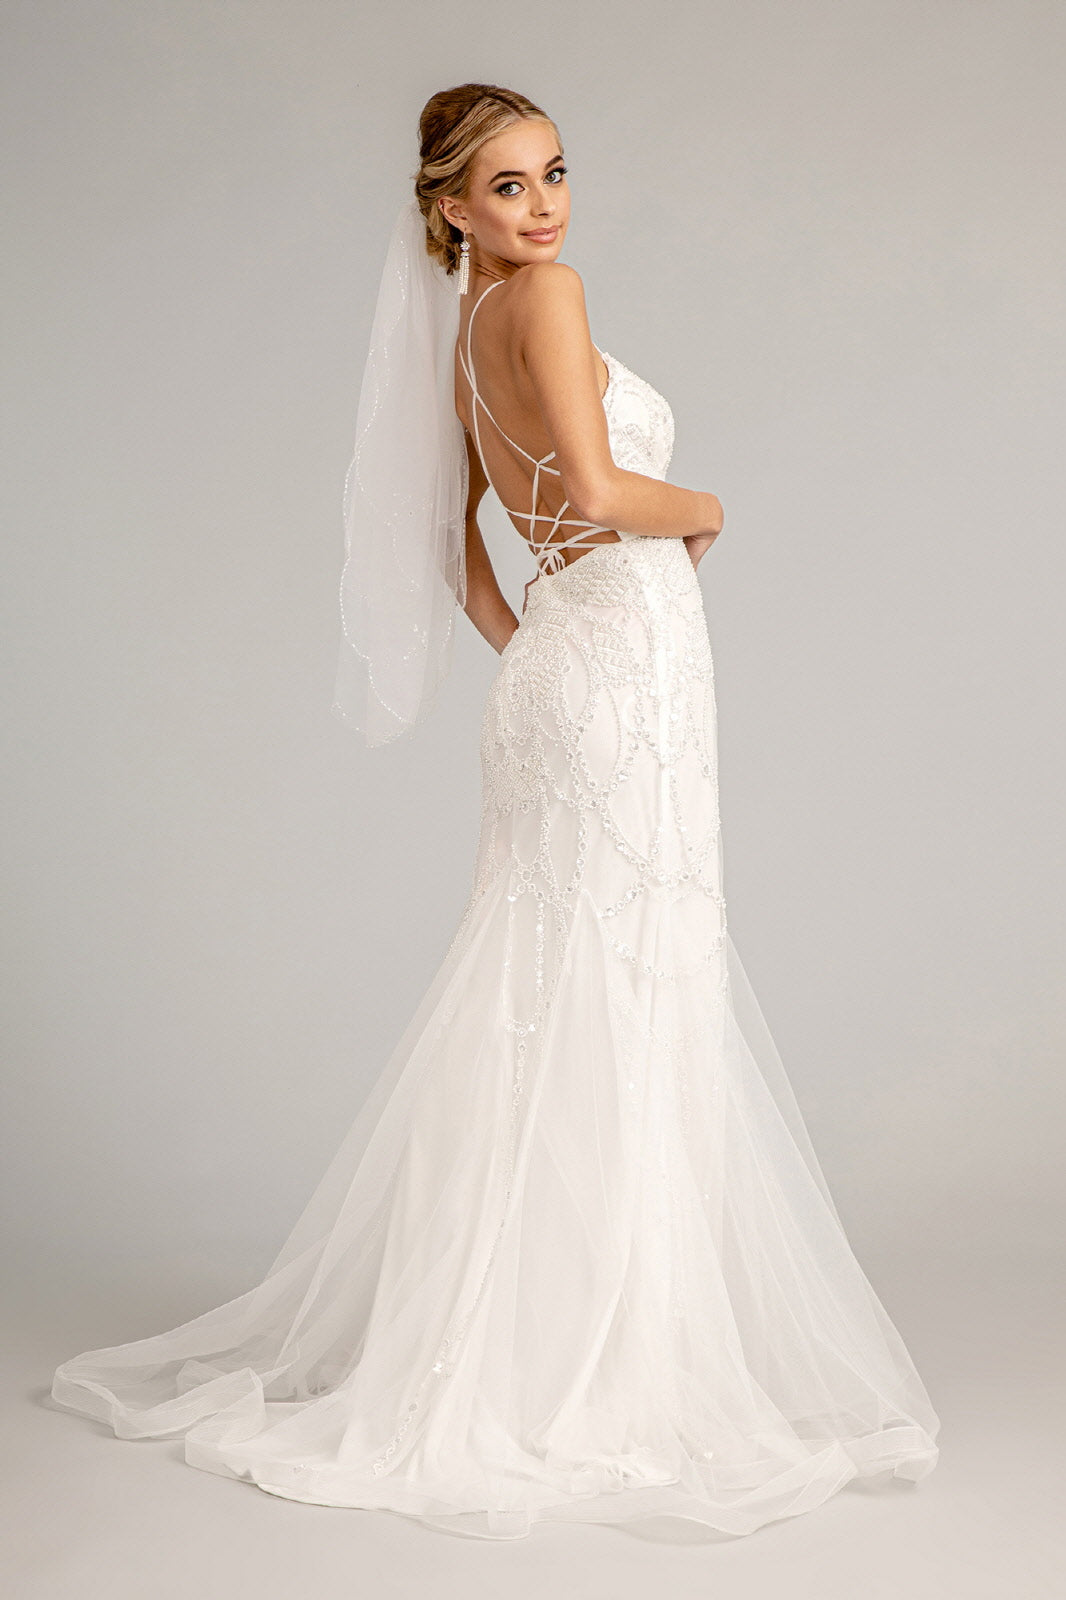 Sweetheart Embroidered Mermaid Wedding Gown Open Back Laced Up GLGL3009-WEDDING GOWNS-smcfashion.com